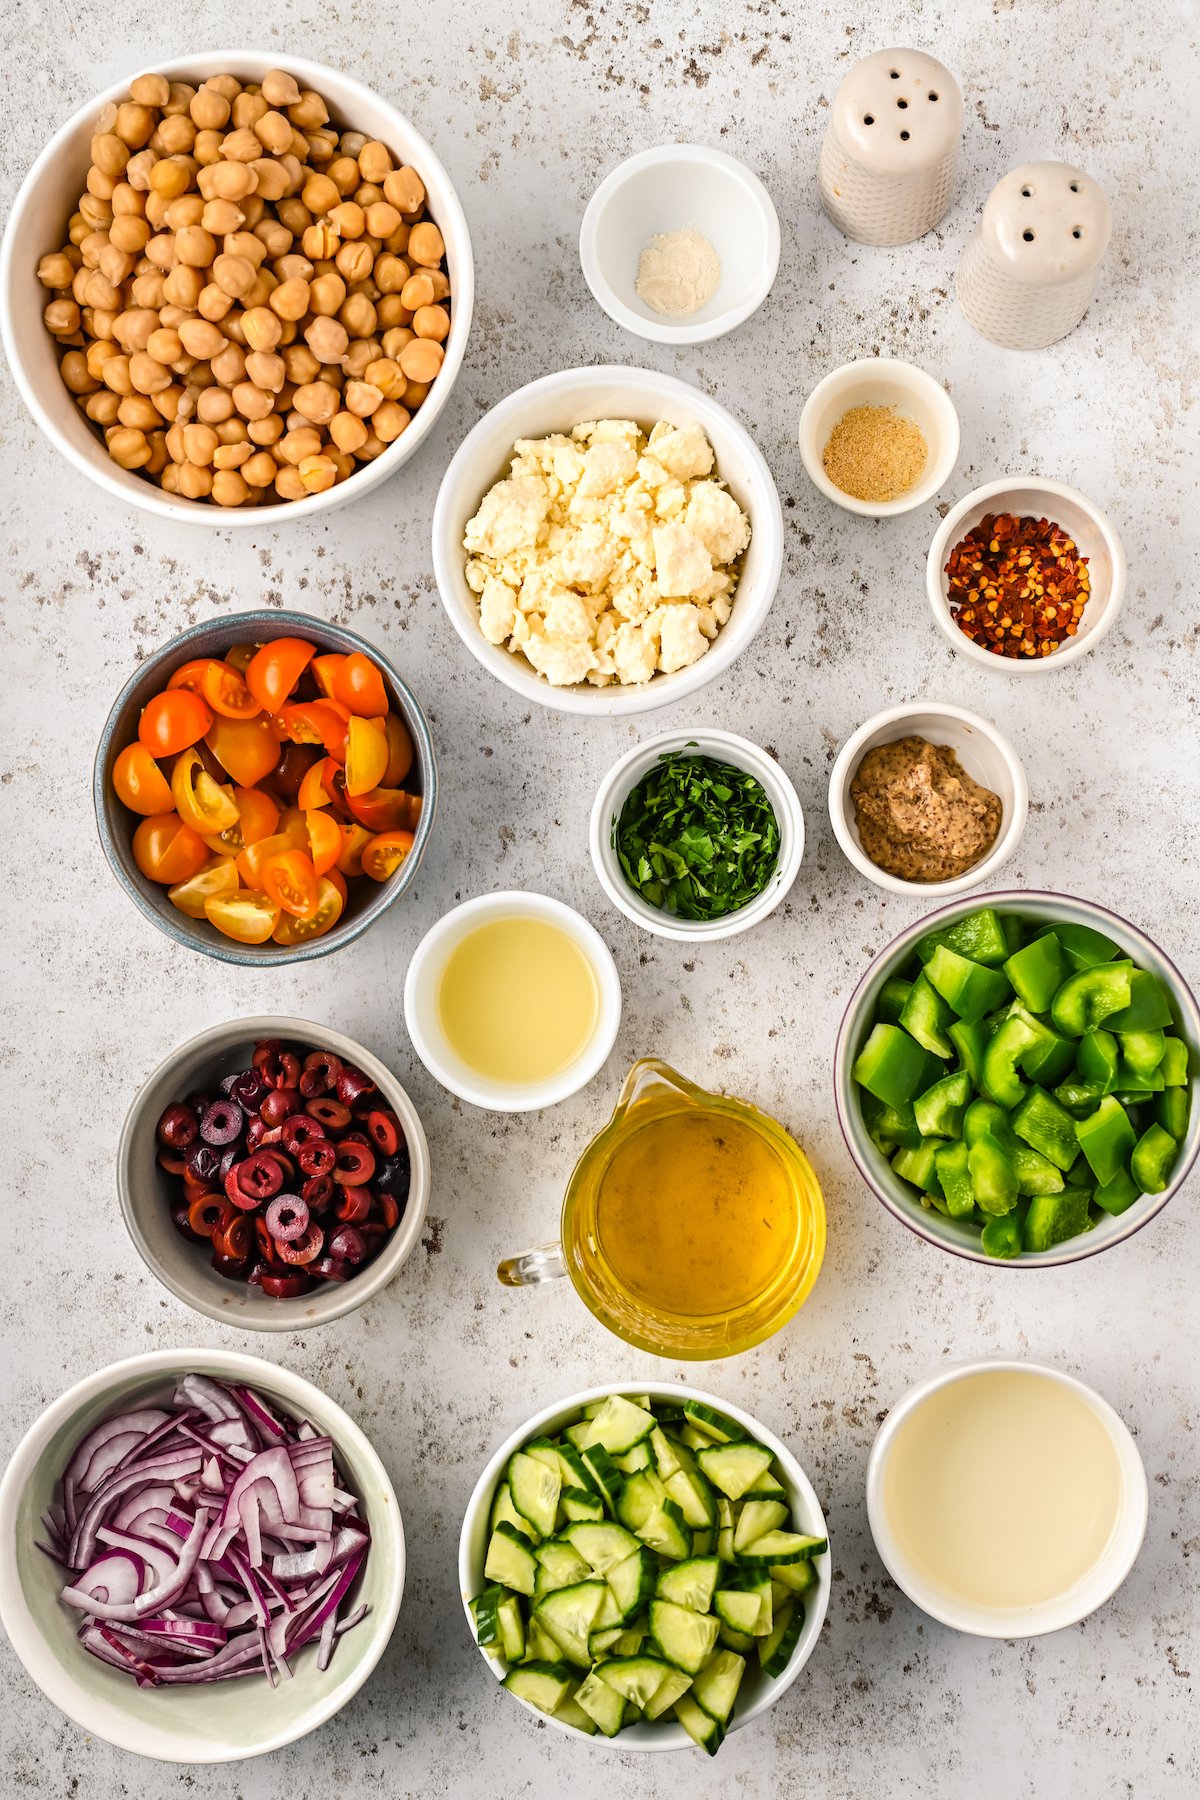 Chickpeas, spices, feta, bell pepper, olives, and other ingredients for chickpea salad measured into small dishes and arranged on a work surface.